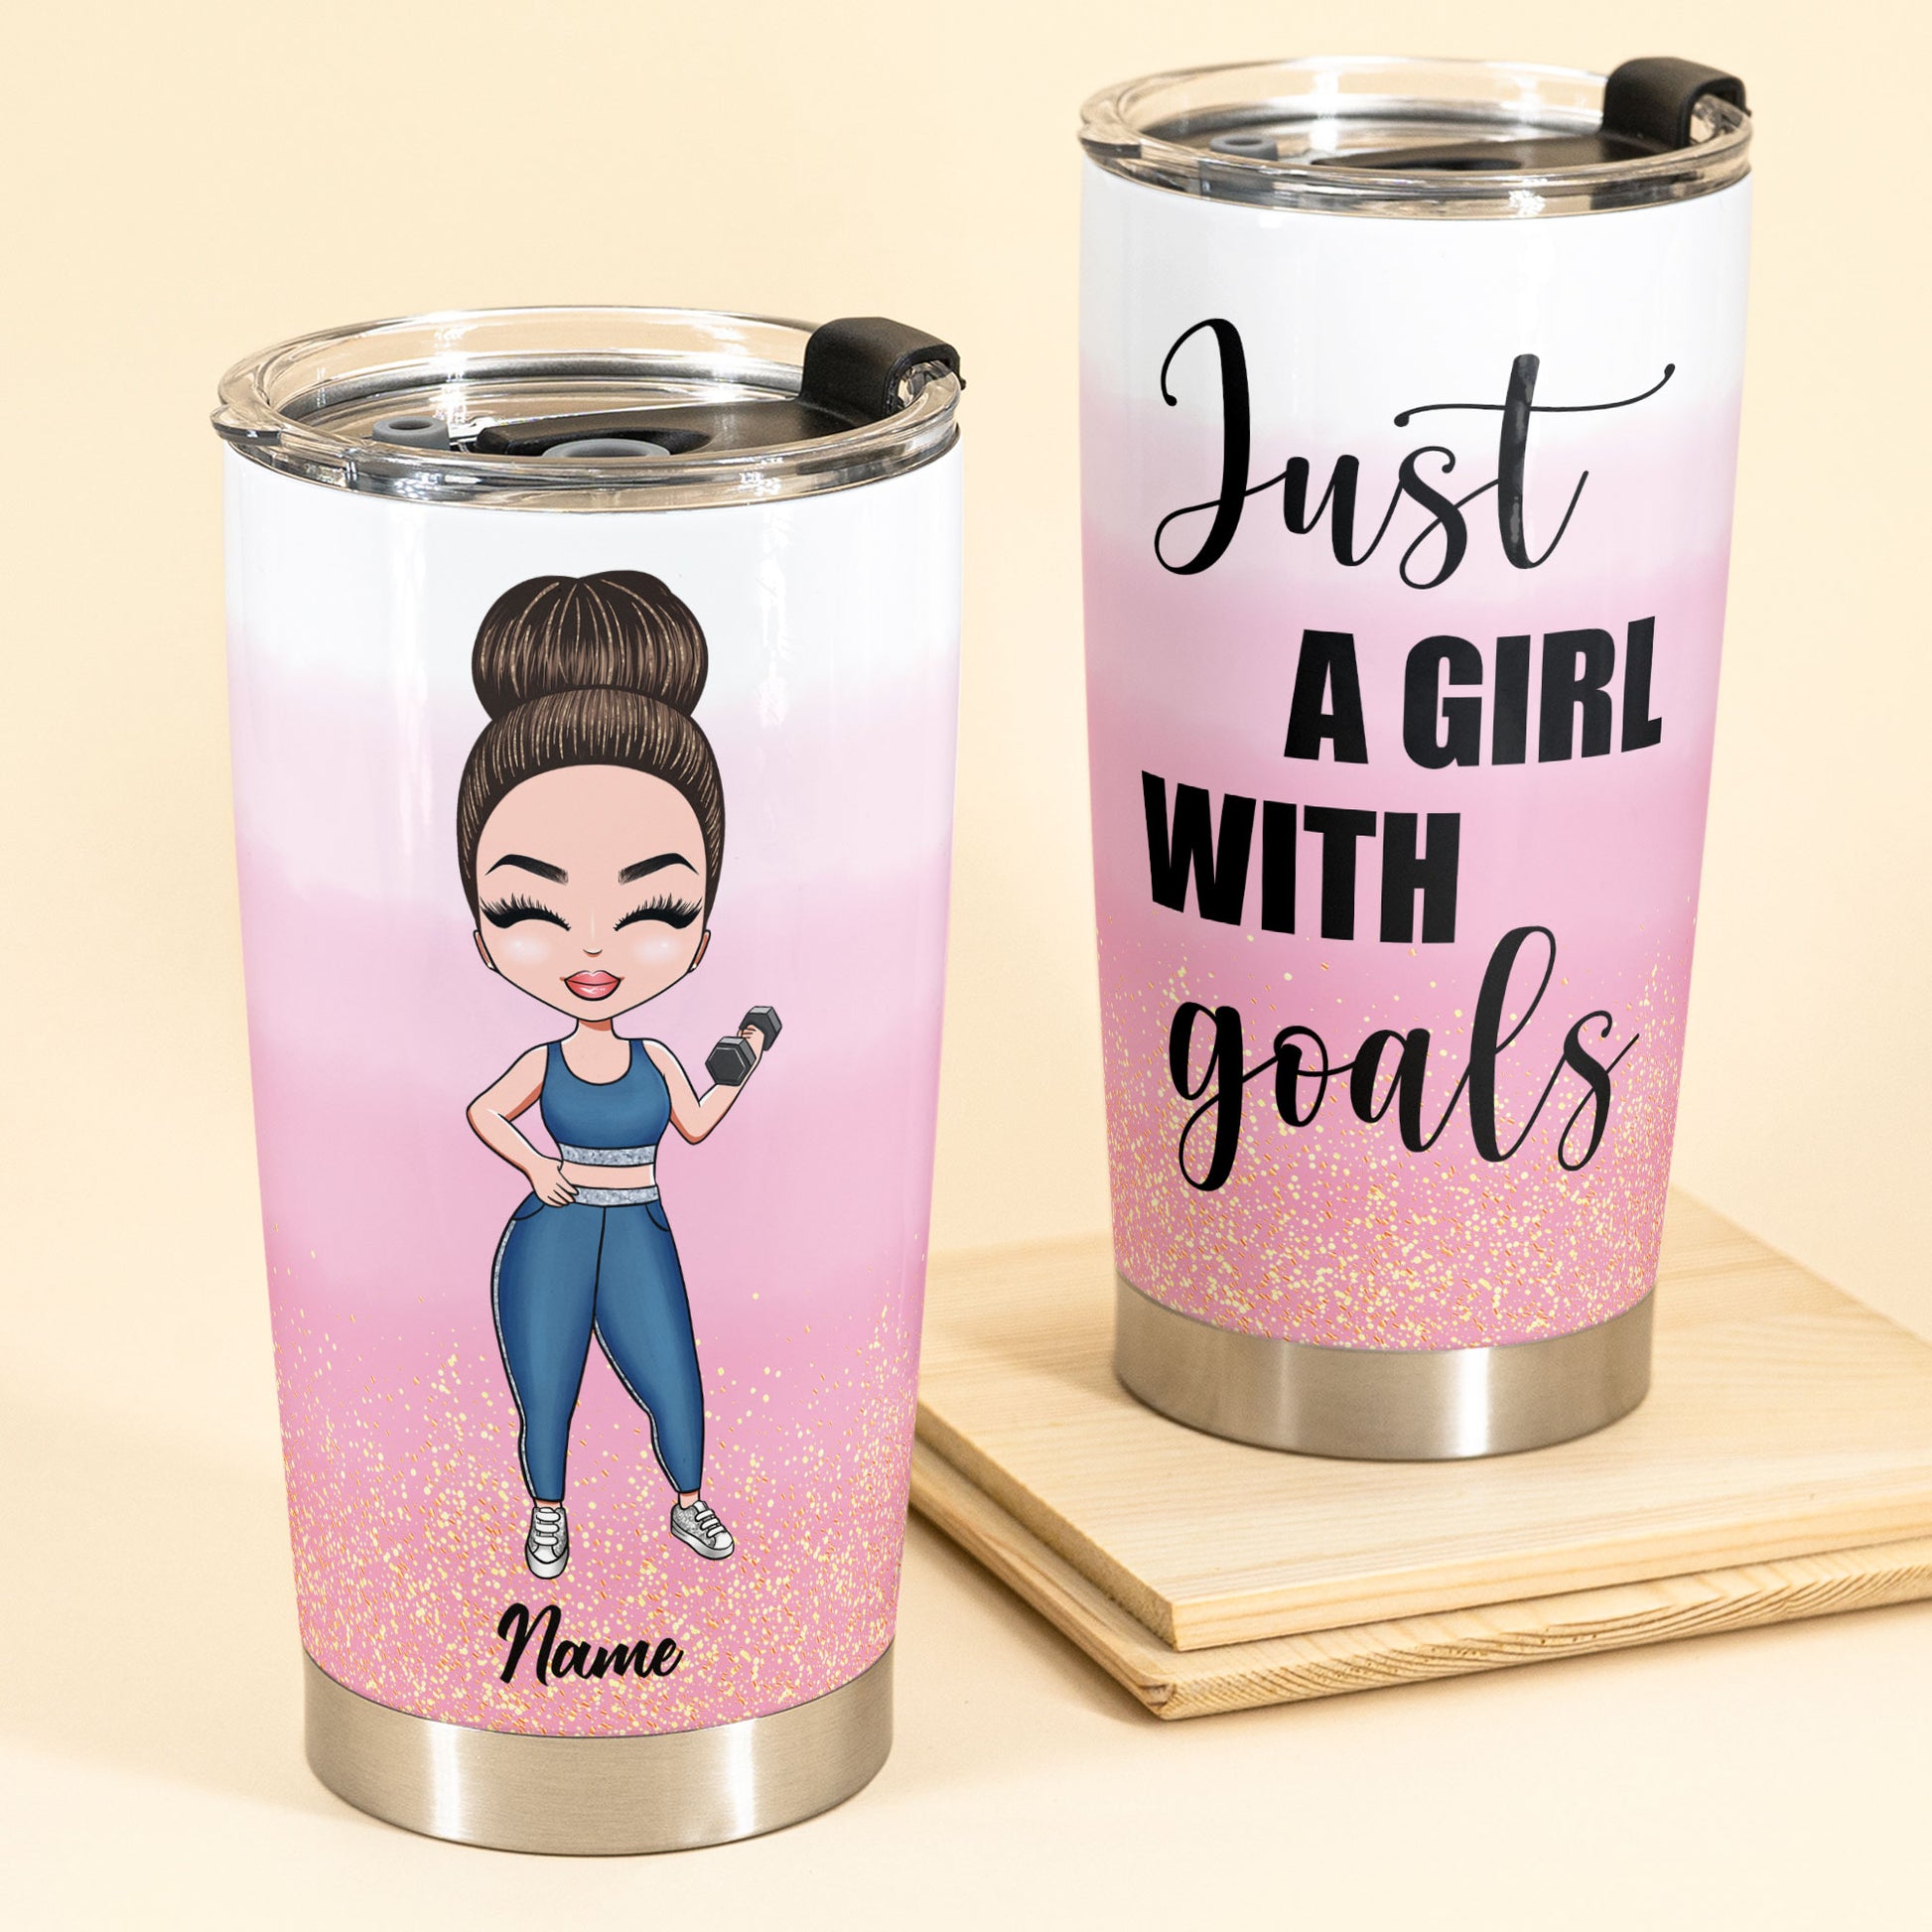 48 Best Gifts for Gym Lovers & Fitness Fans 2022